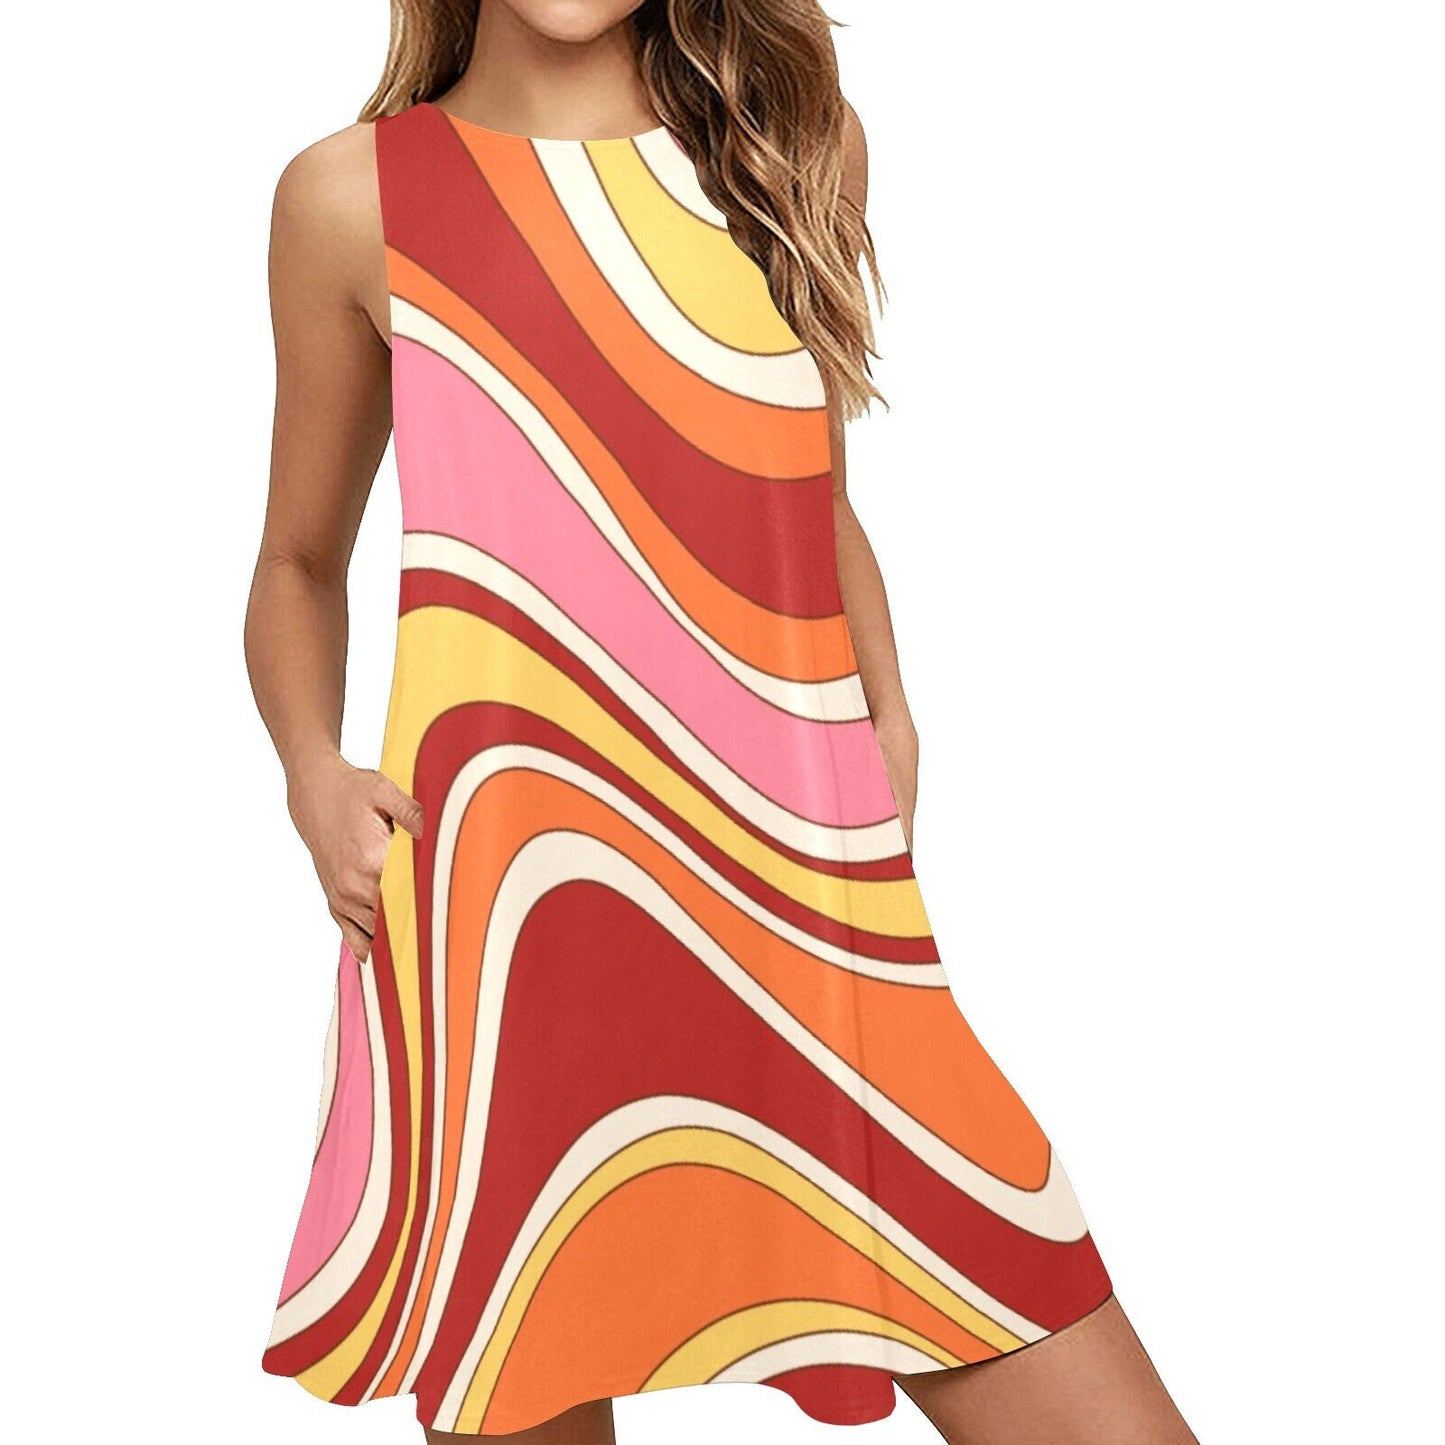 Robe tente Groovy Red Pink années 70 pour femme